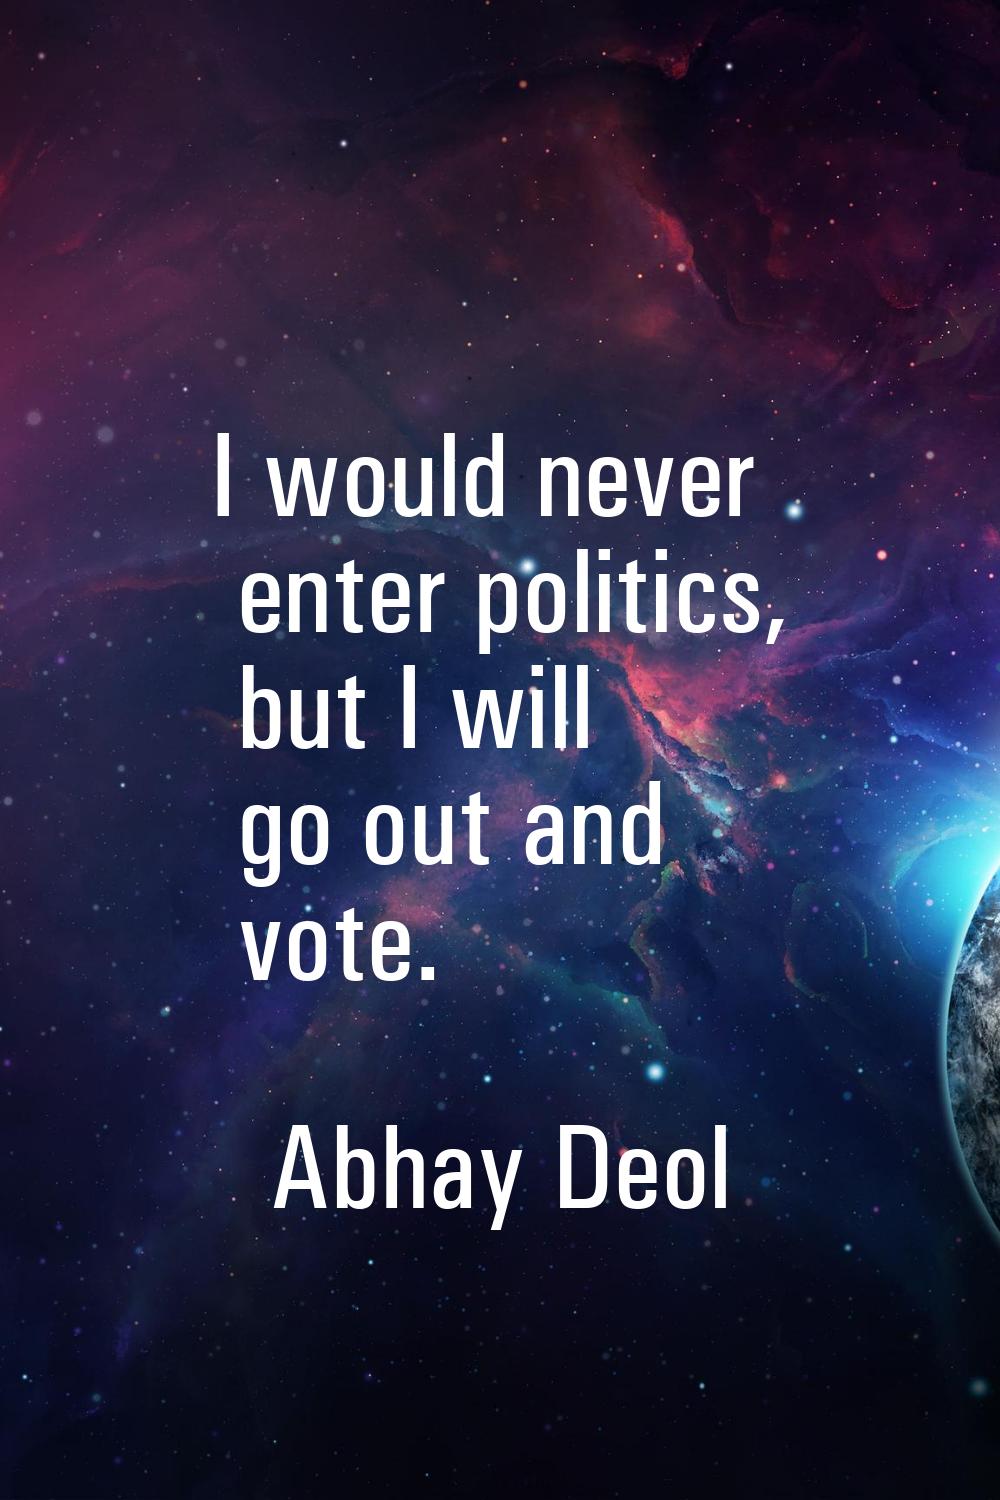 I would never enter politics, but I will go out and vote.